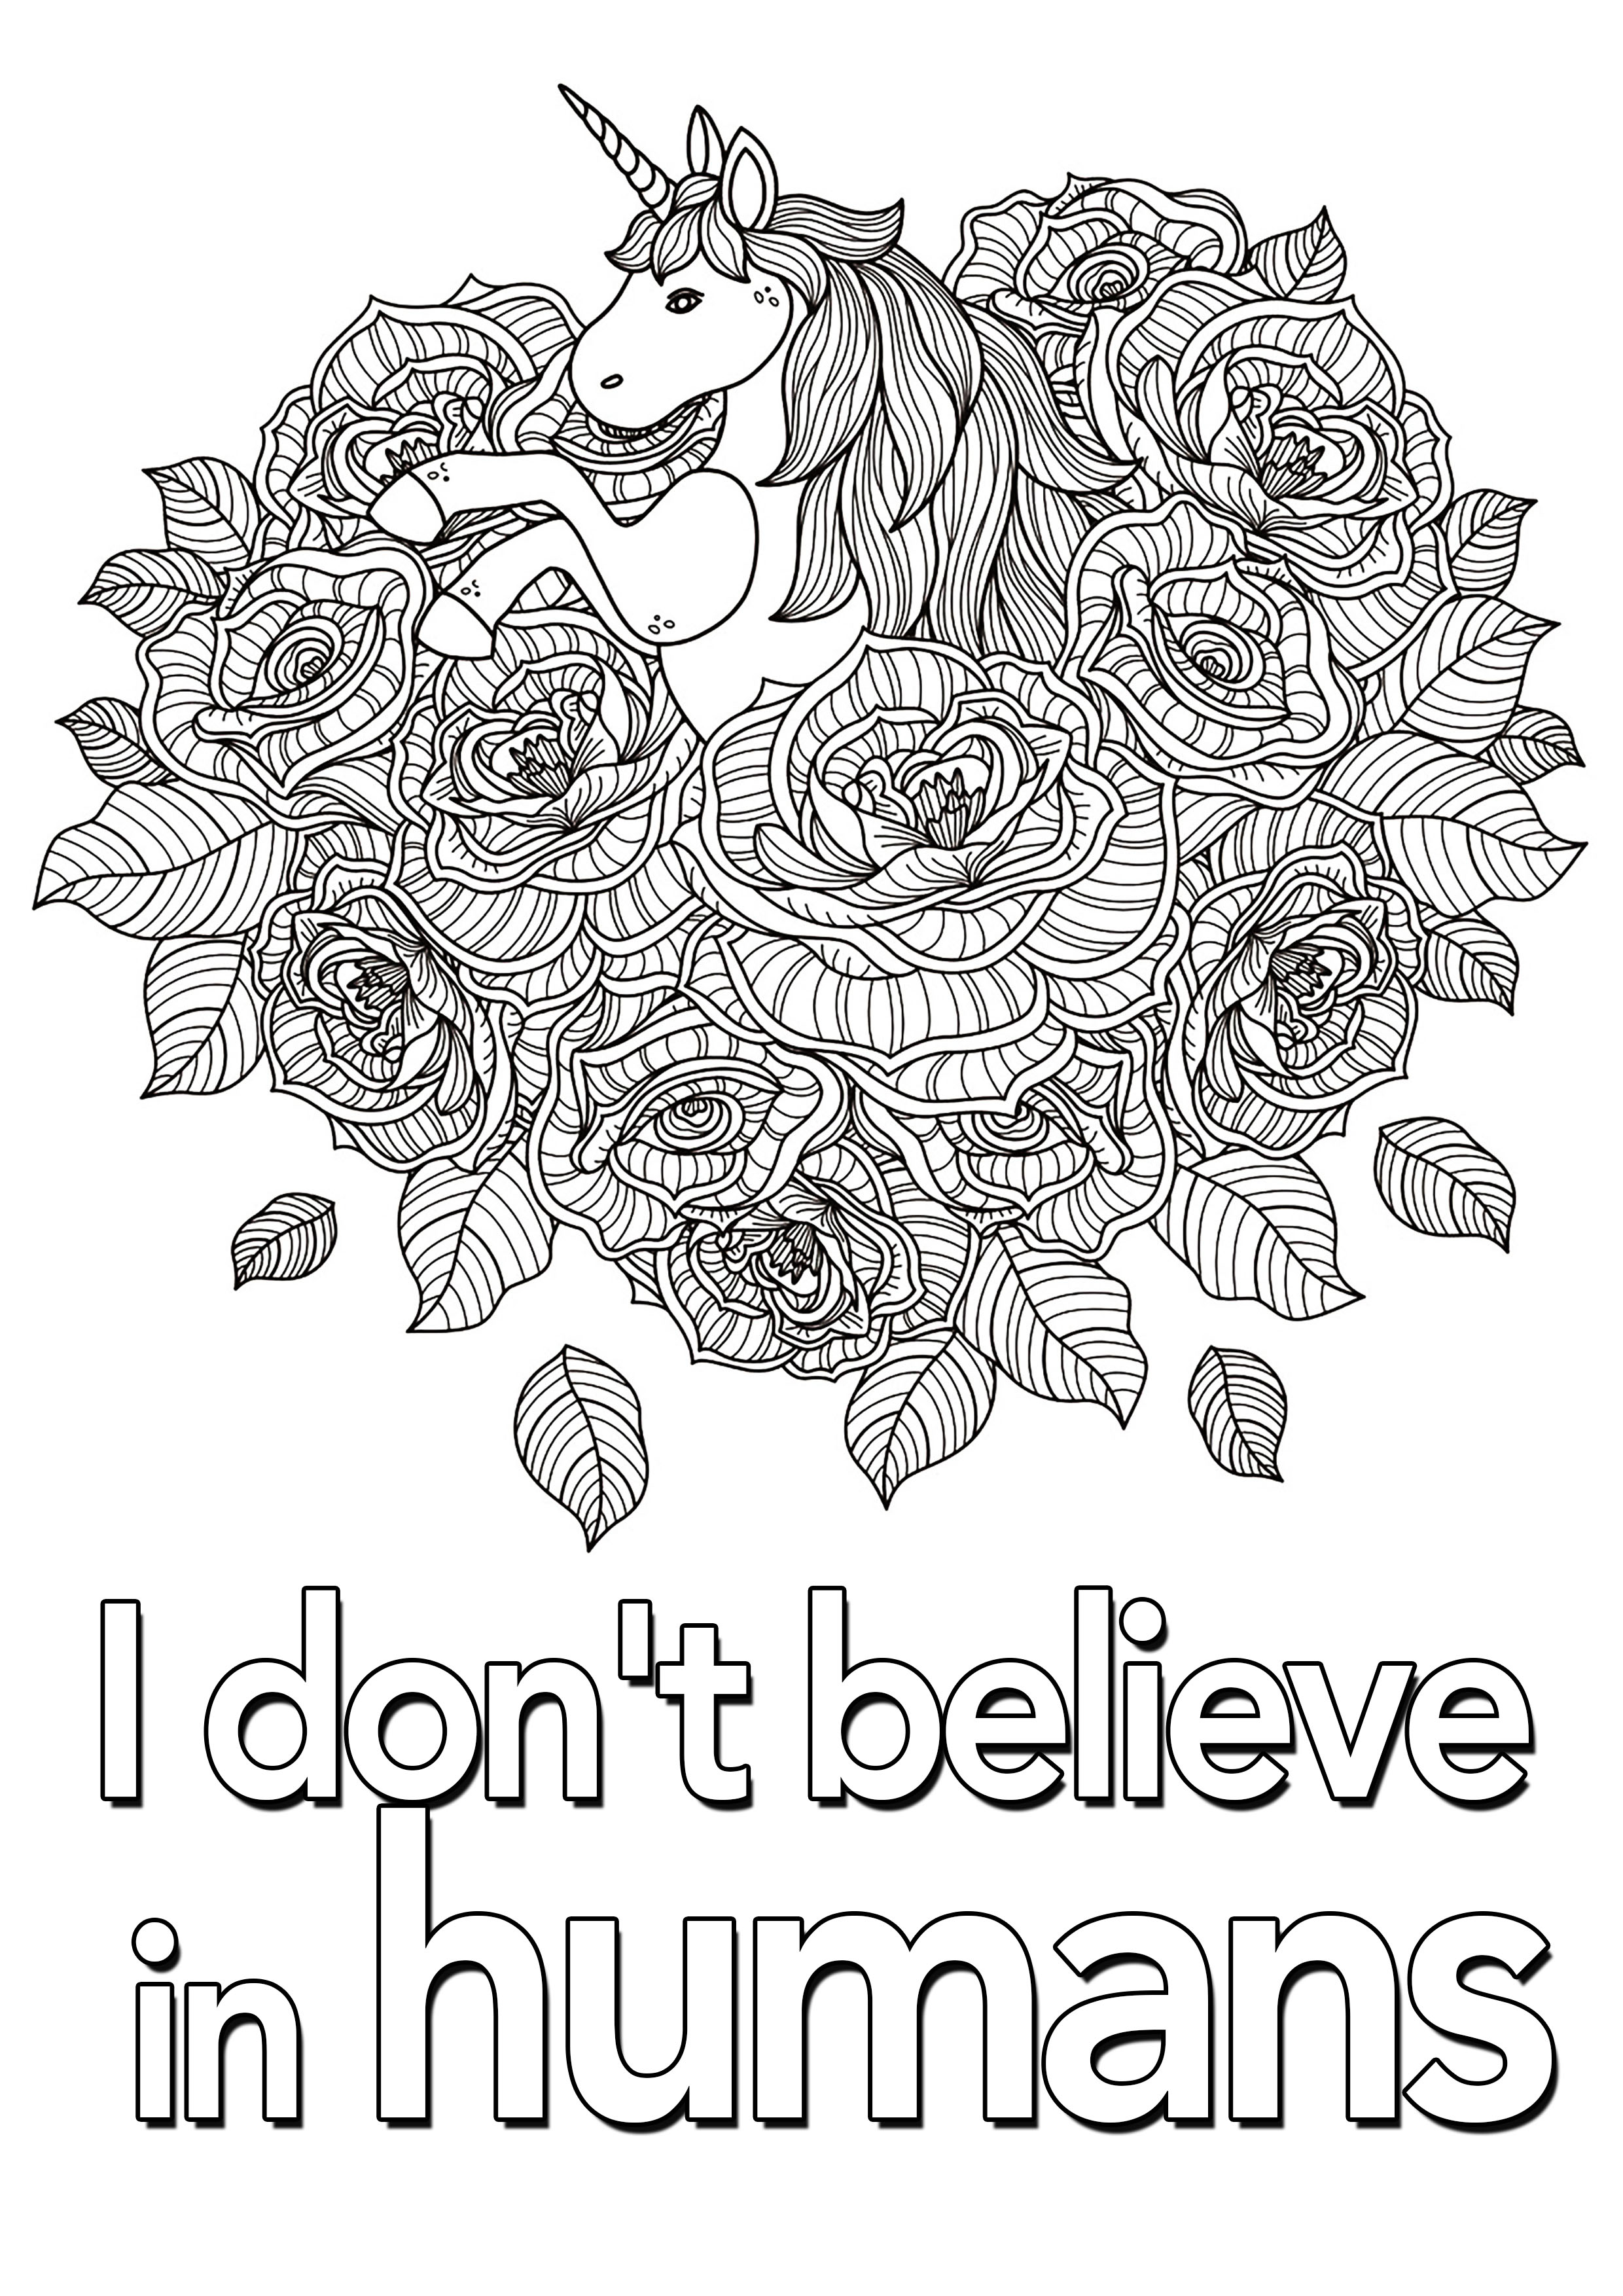 'I don't believe in humans' : Quote to color with beautiful unicorn and flowers